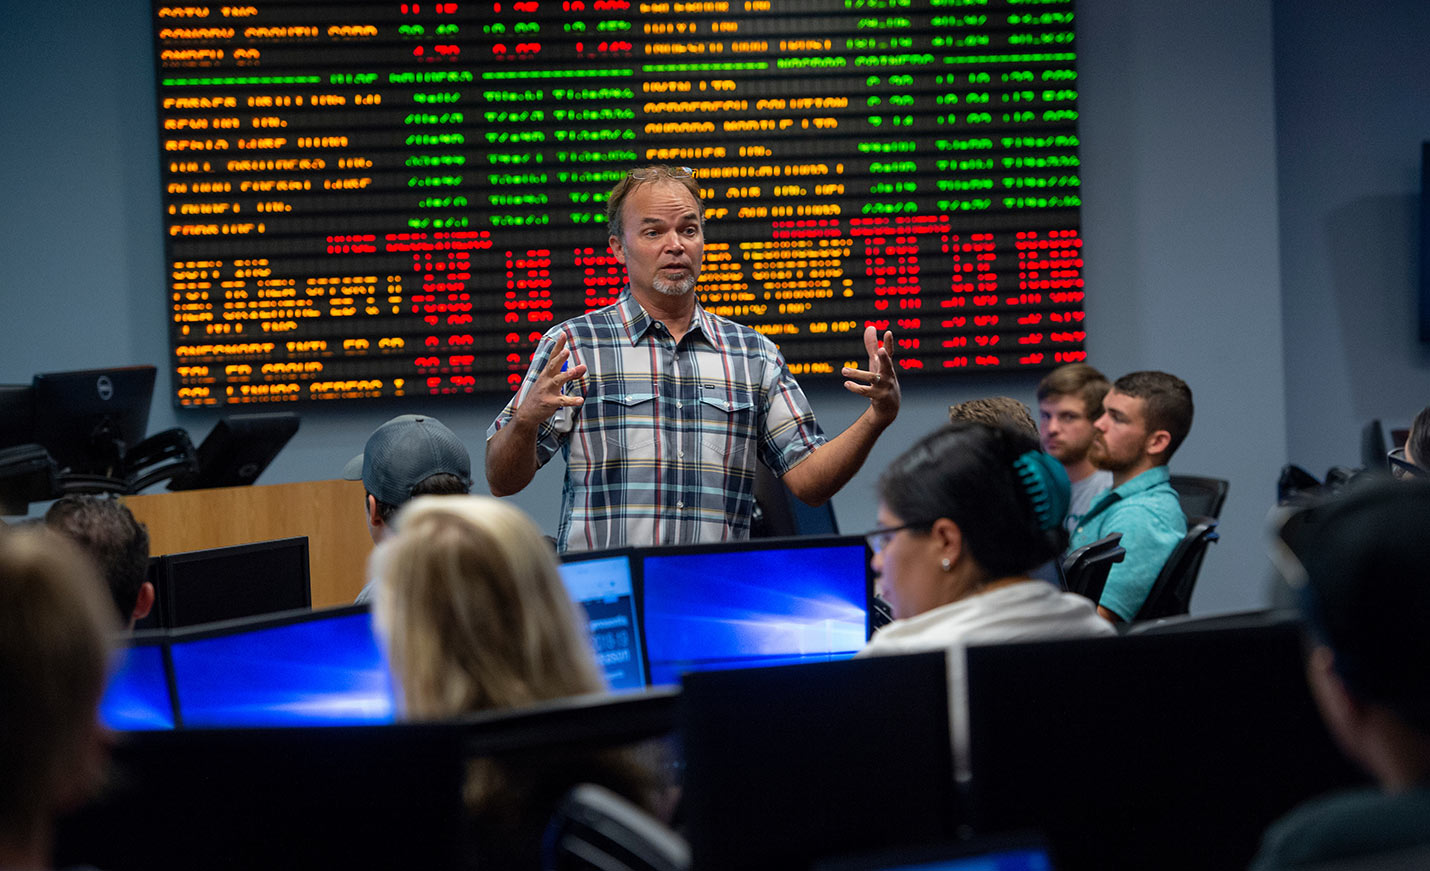 A professor gives a lecture in front of a large group of people while standing in front of a stock ticker board